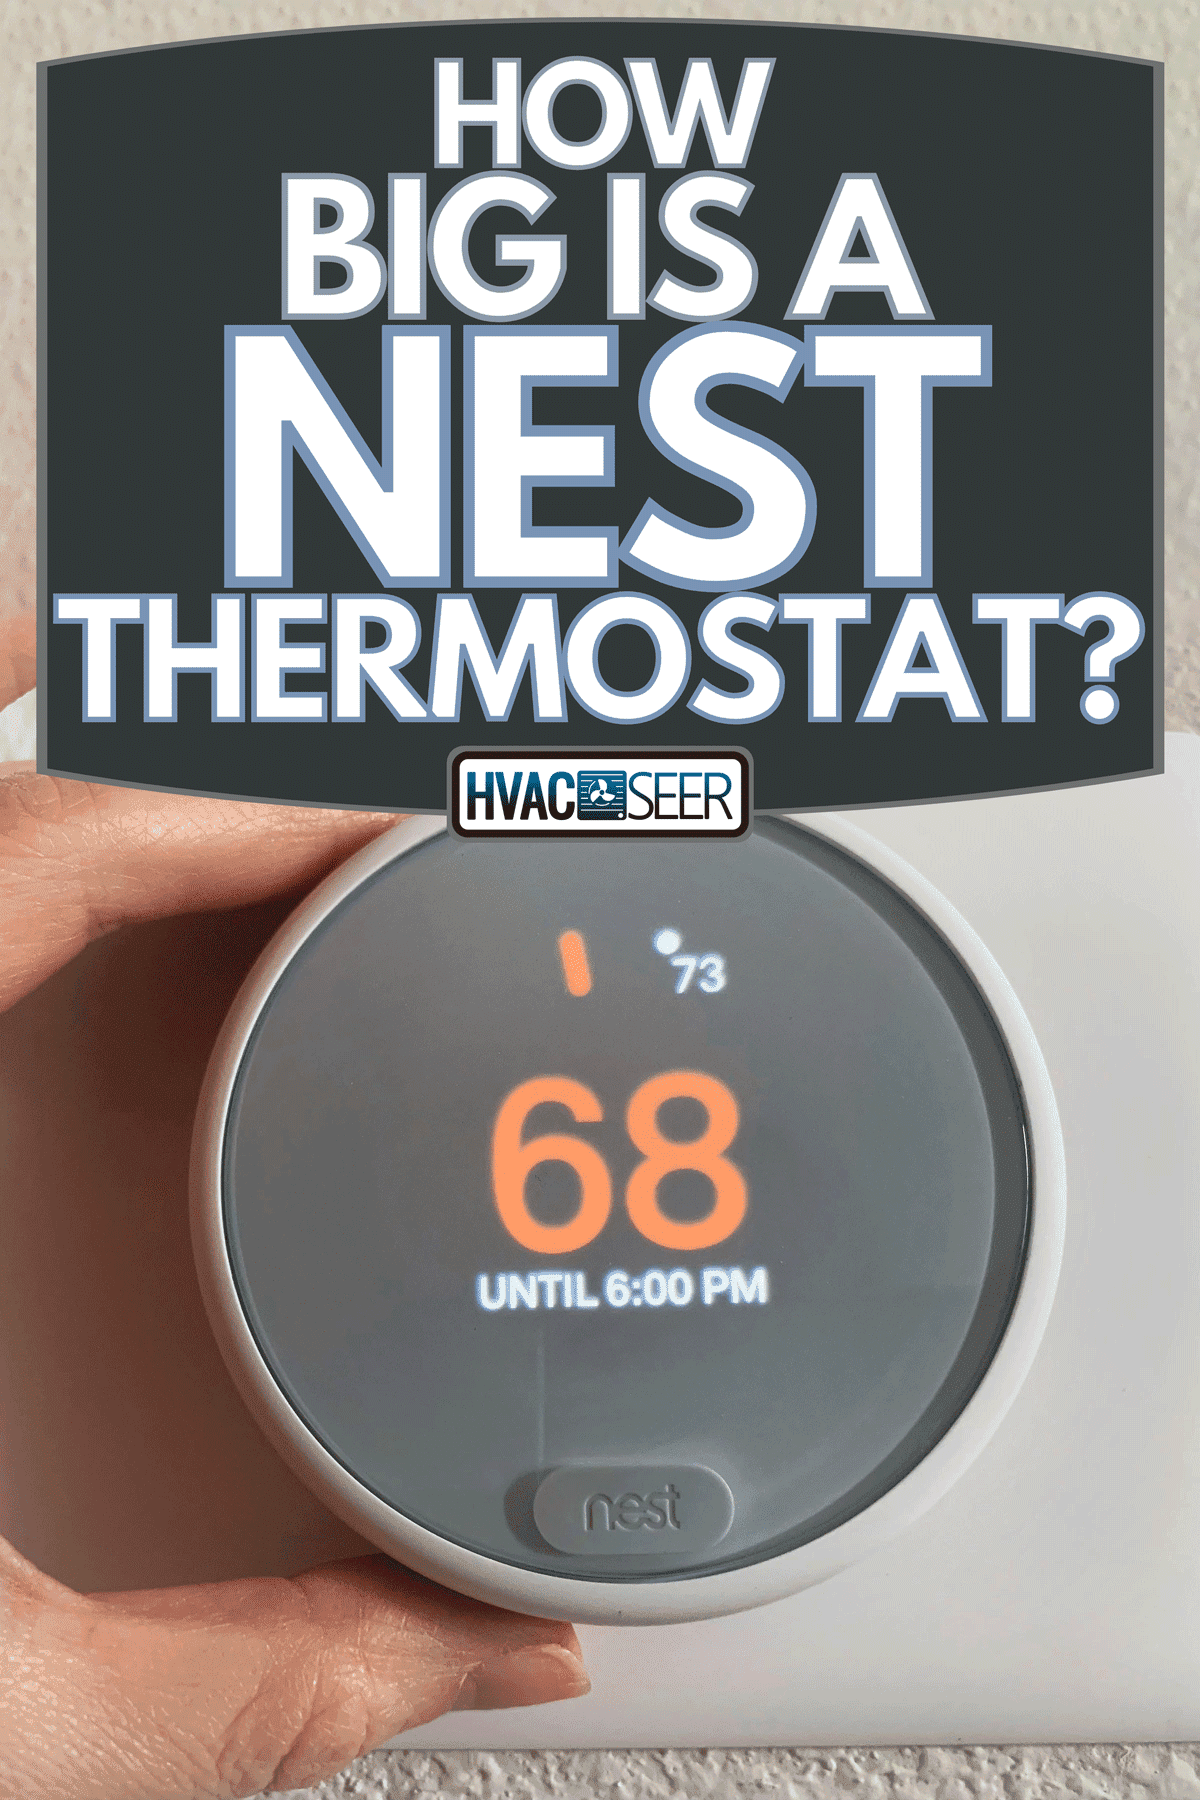 White nest thermostat used to save energy and cut costs on your electric bill, How Big Is A Nest Thermostat?